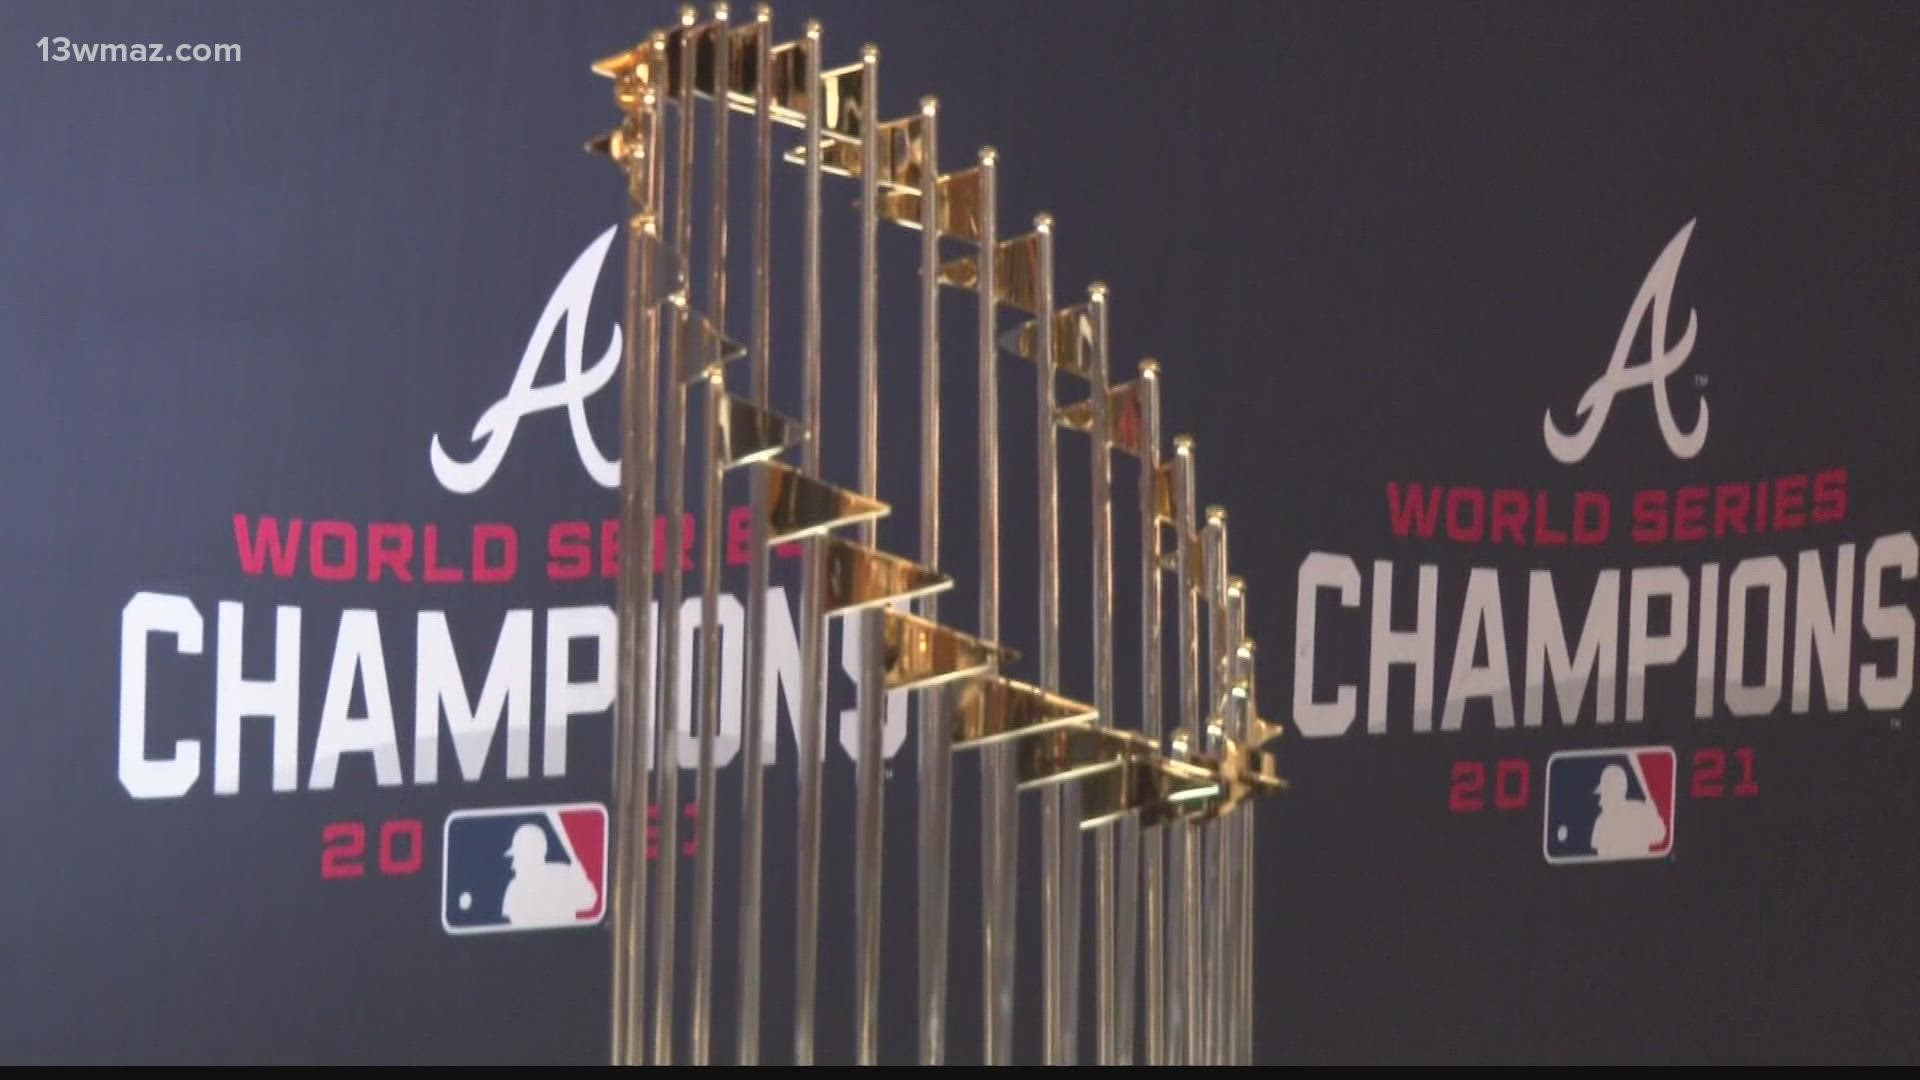 The Atlanta Braves will open their World Series title defense in special gold-trimmed uniforms, along with a wide variety of new dining offerings for fans to enjoy.